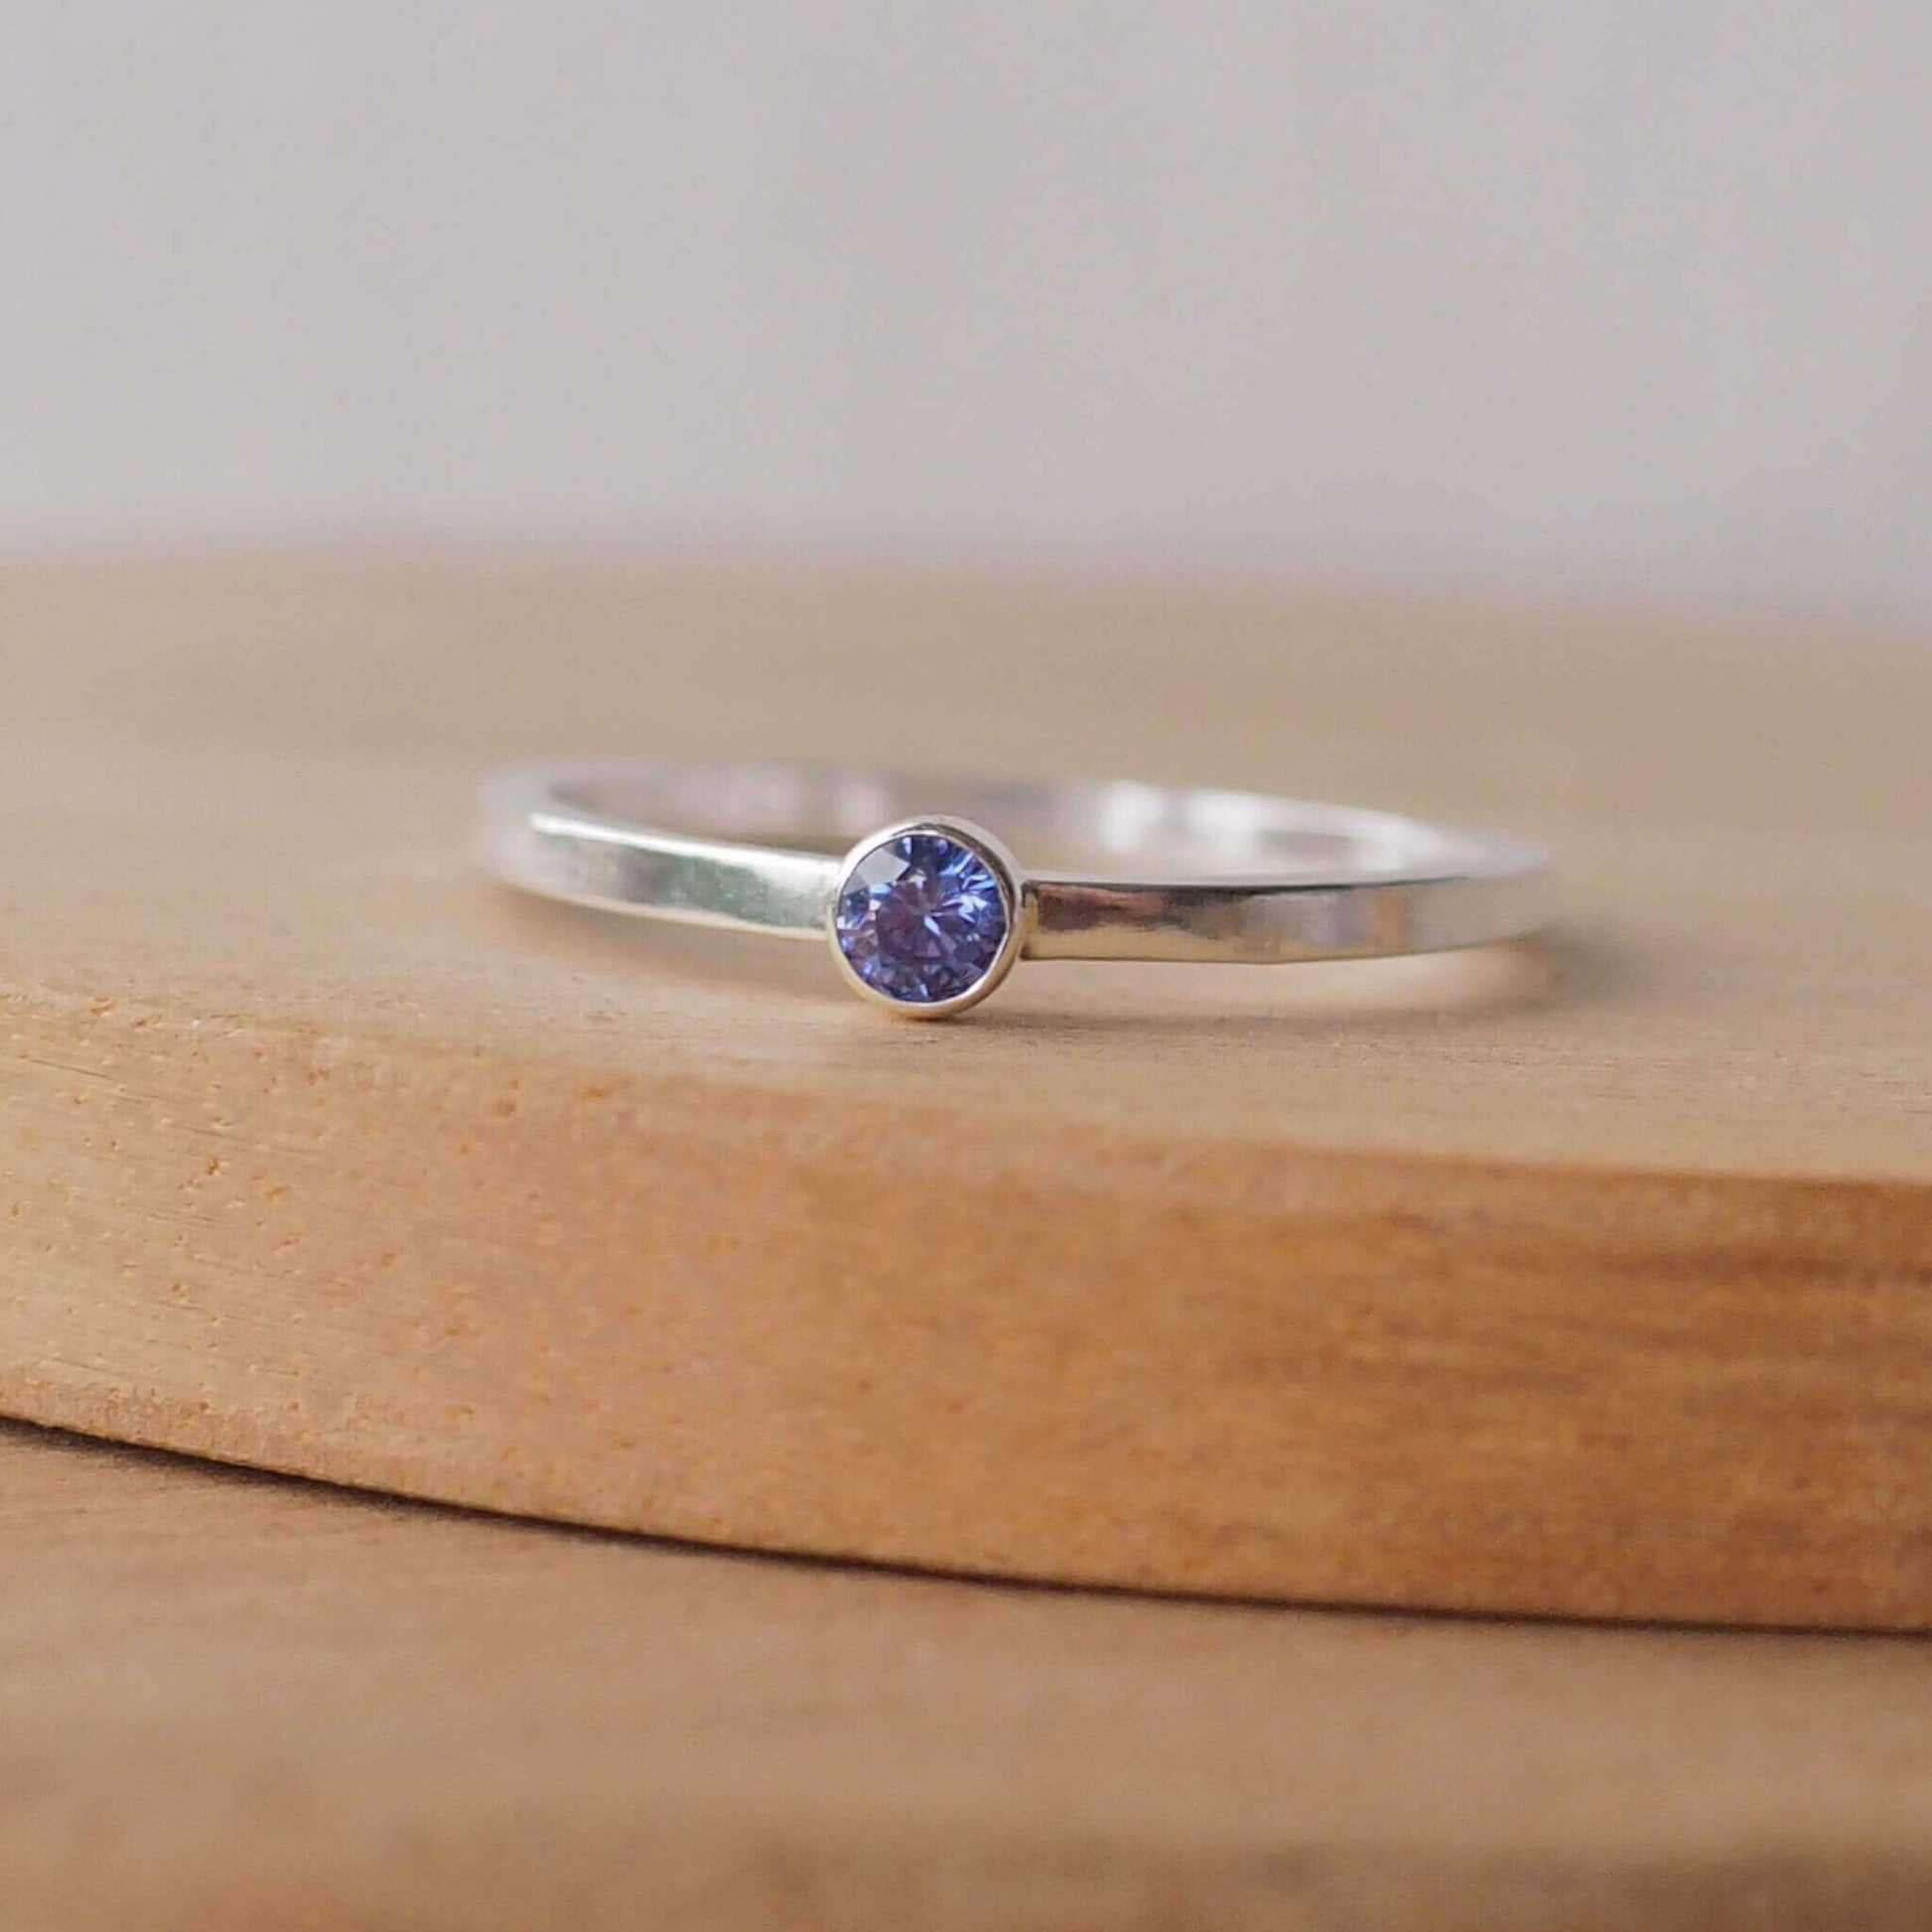 Simple Solitaire ring with a man made tanzanite gemstone. The ring is made from Sterling Silver and a round violet cubic zirconia  measuring 3mm in size. It is sent onto a modern ring with a square profile. The ring is handmade by maram jewellery in Scotland